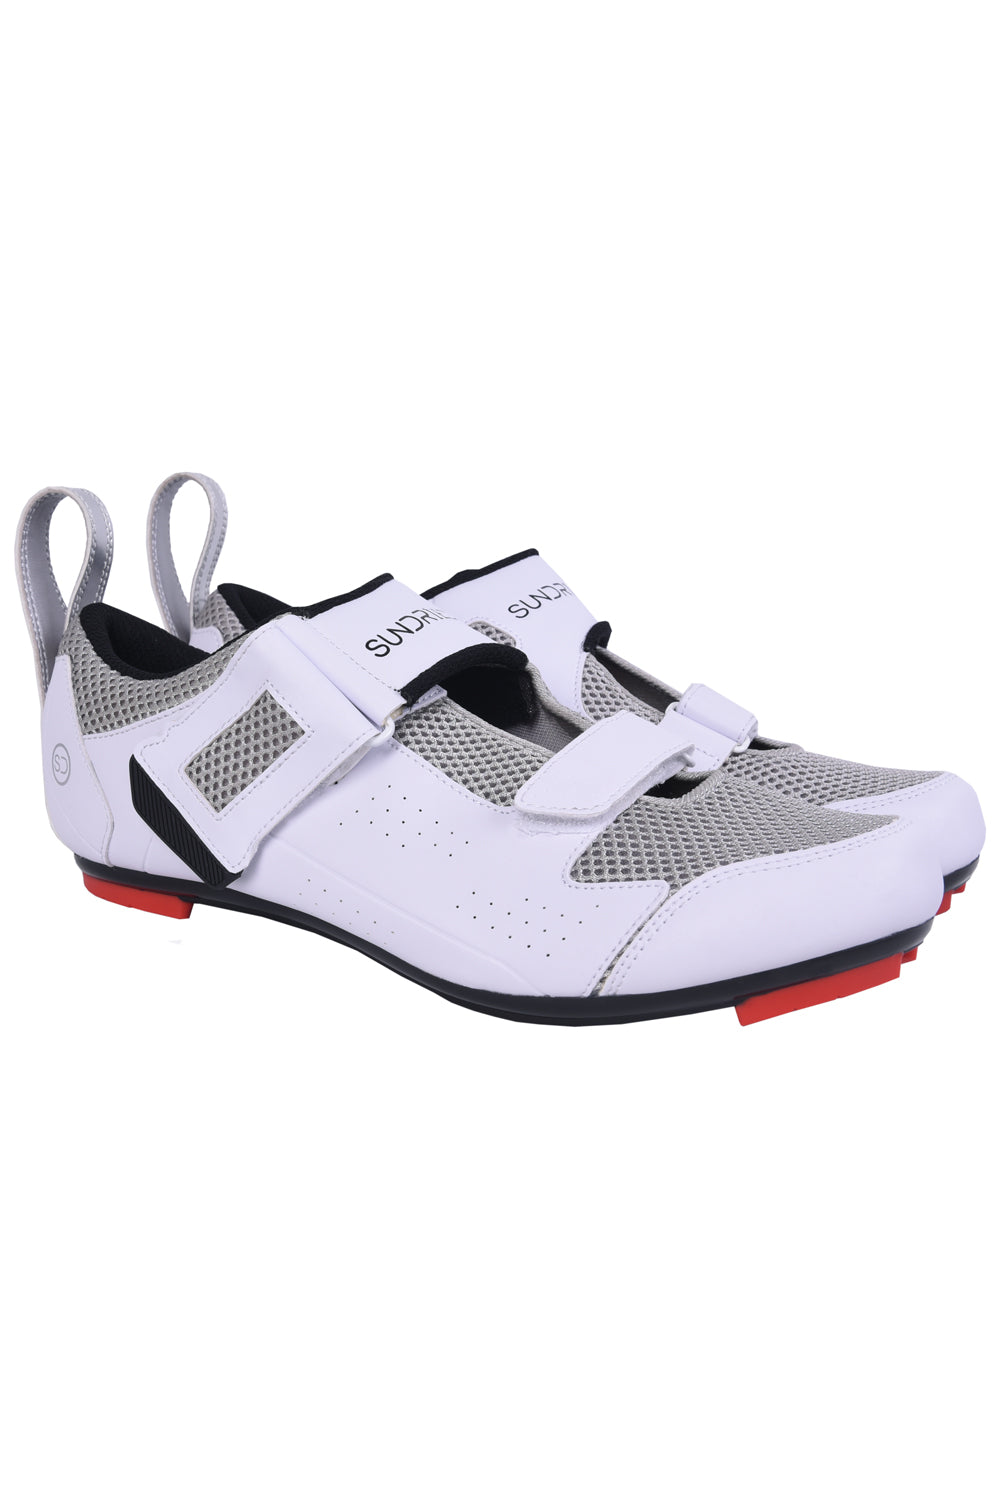 Sundried S-GT5 Triathlon Cycle Shoes Cycle Shoes Activewear